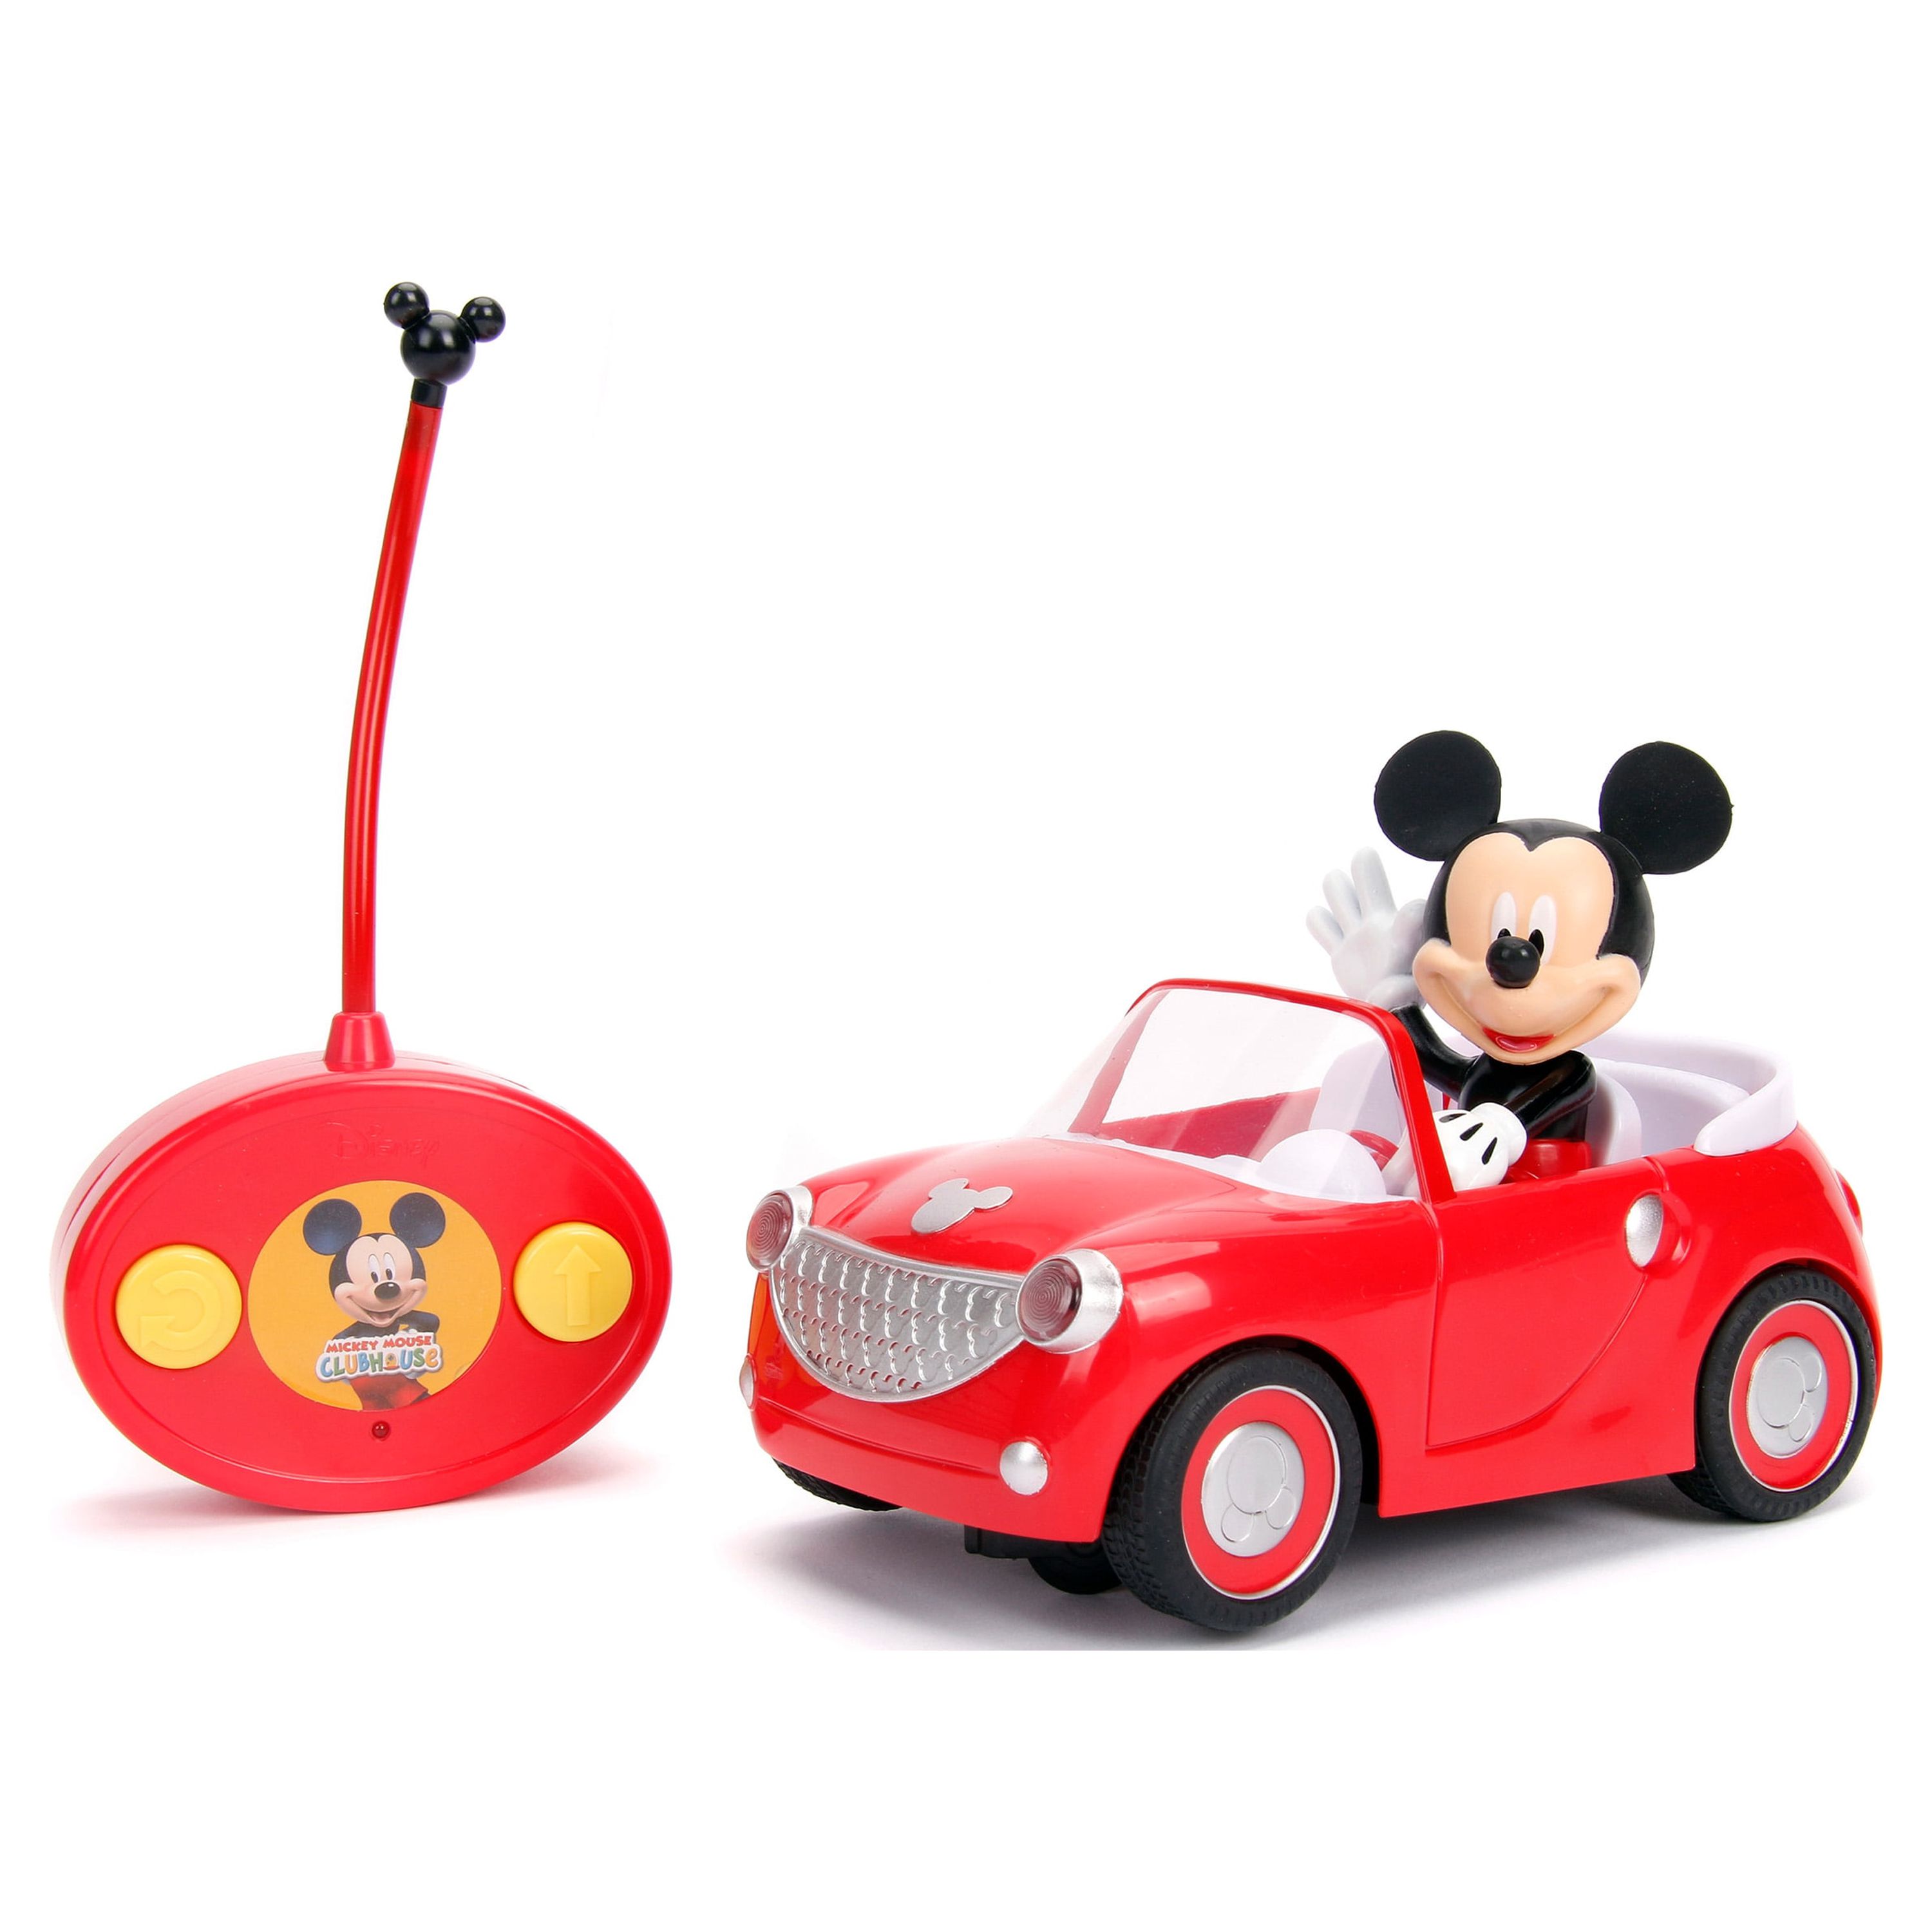 Jada Toys Classic Roadster Mickey Mouse Battery-Powered RC Car(Red) - image 1 of 6